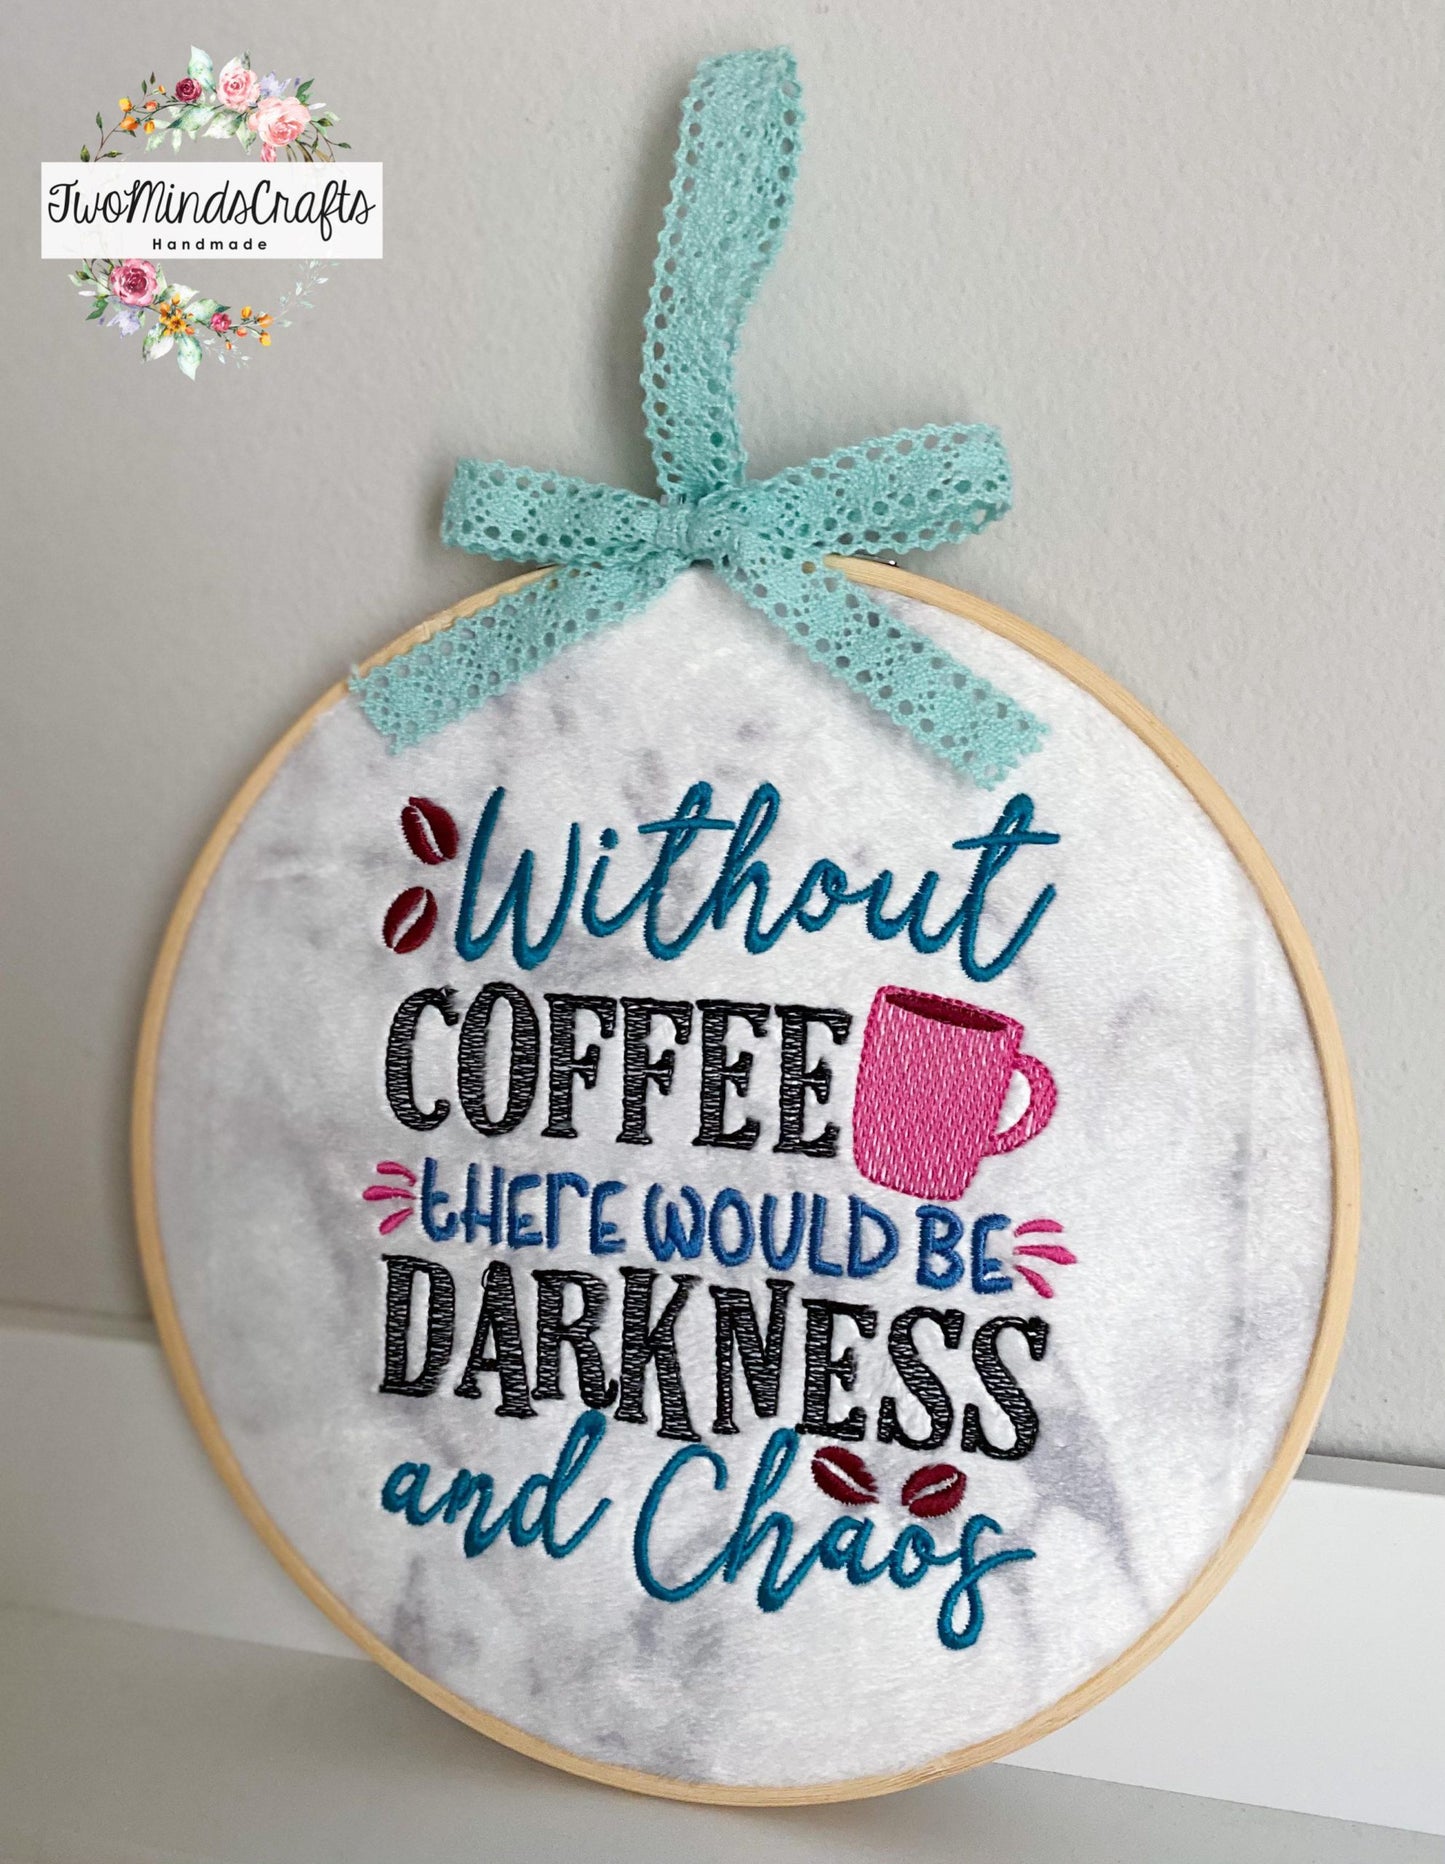 Darkness and Chaos - 2 sizes- Digital Embroidery Design